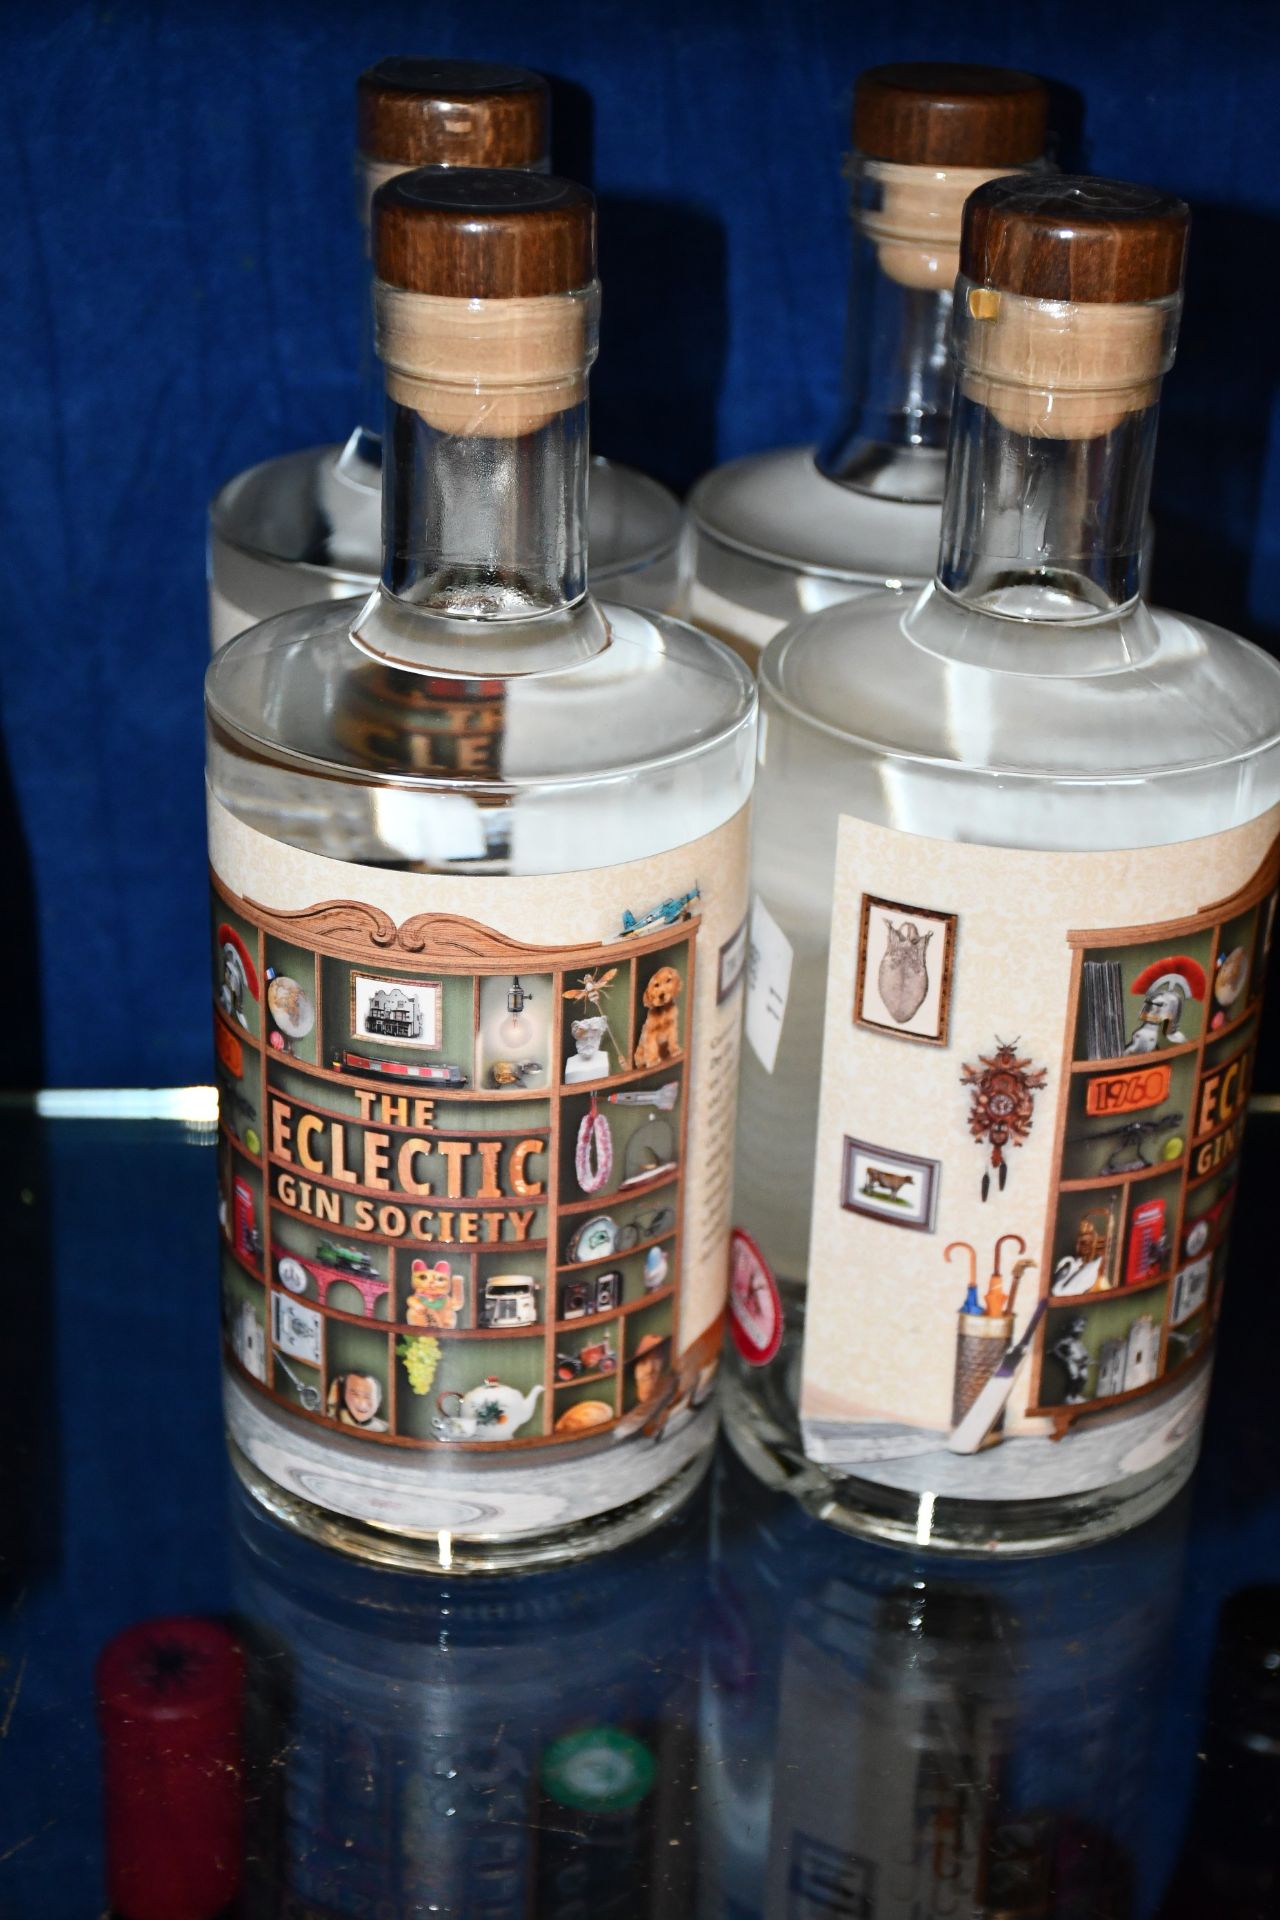 Four The Eclectic Gin Society (4 x 700ml) (Over 18s only).